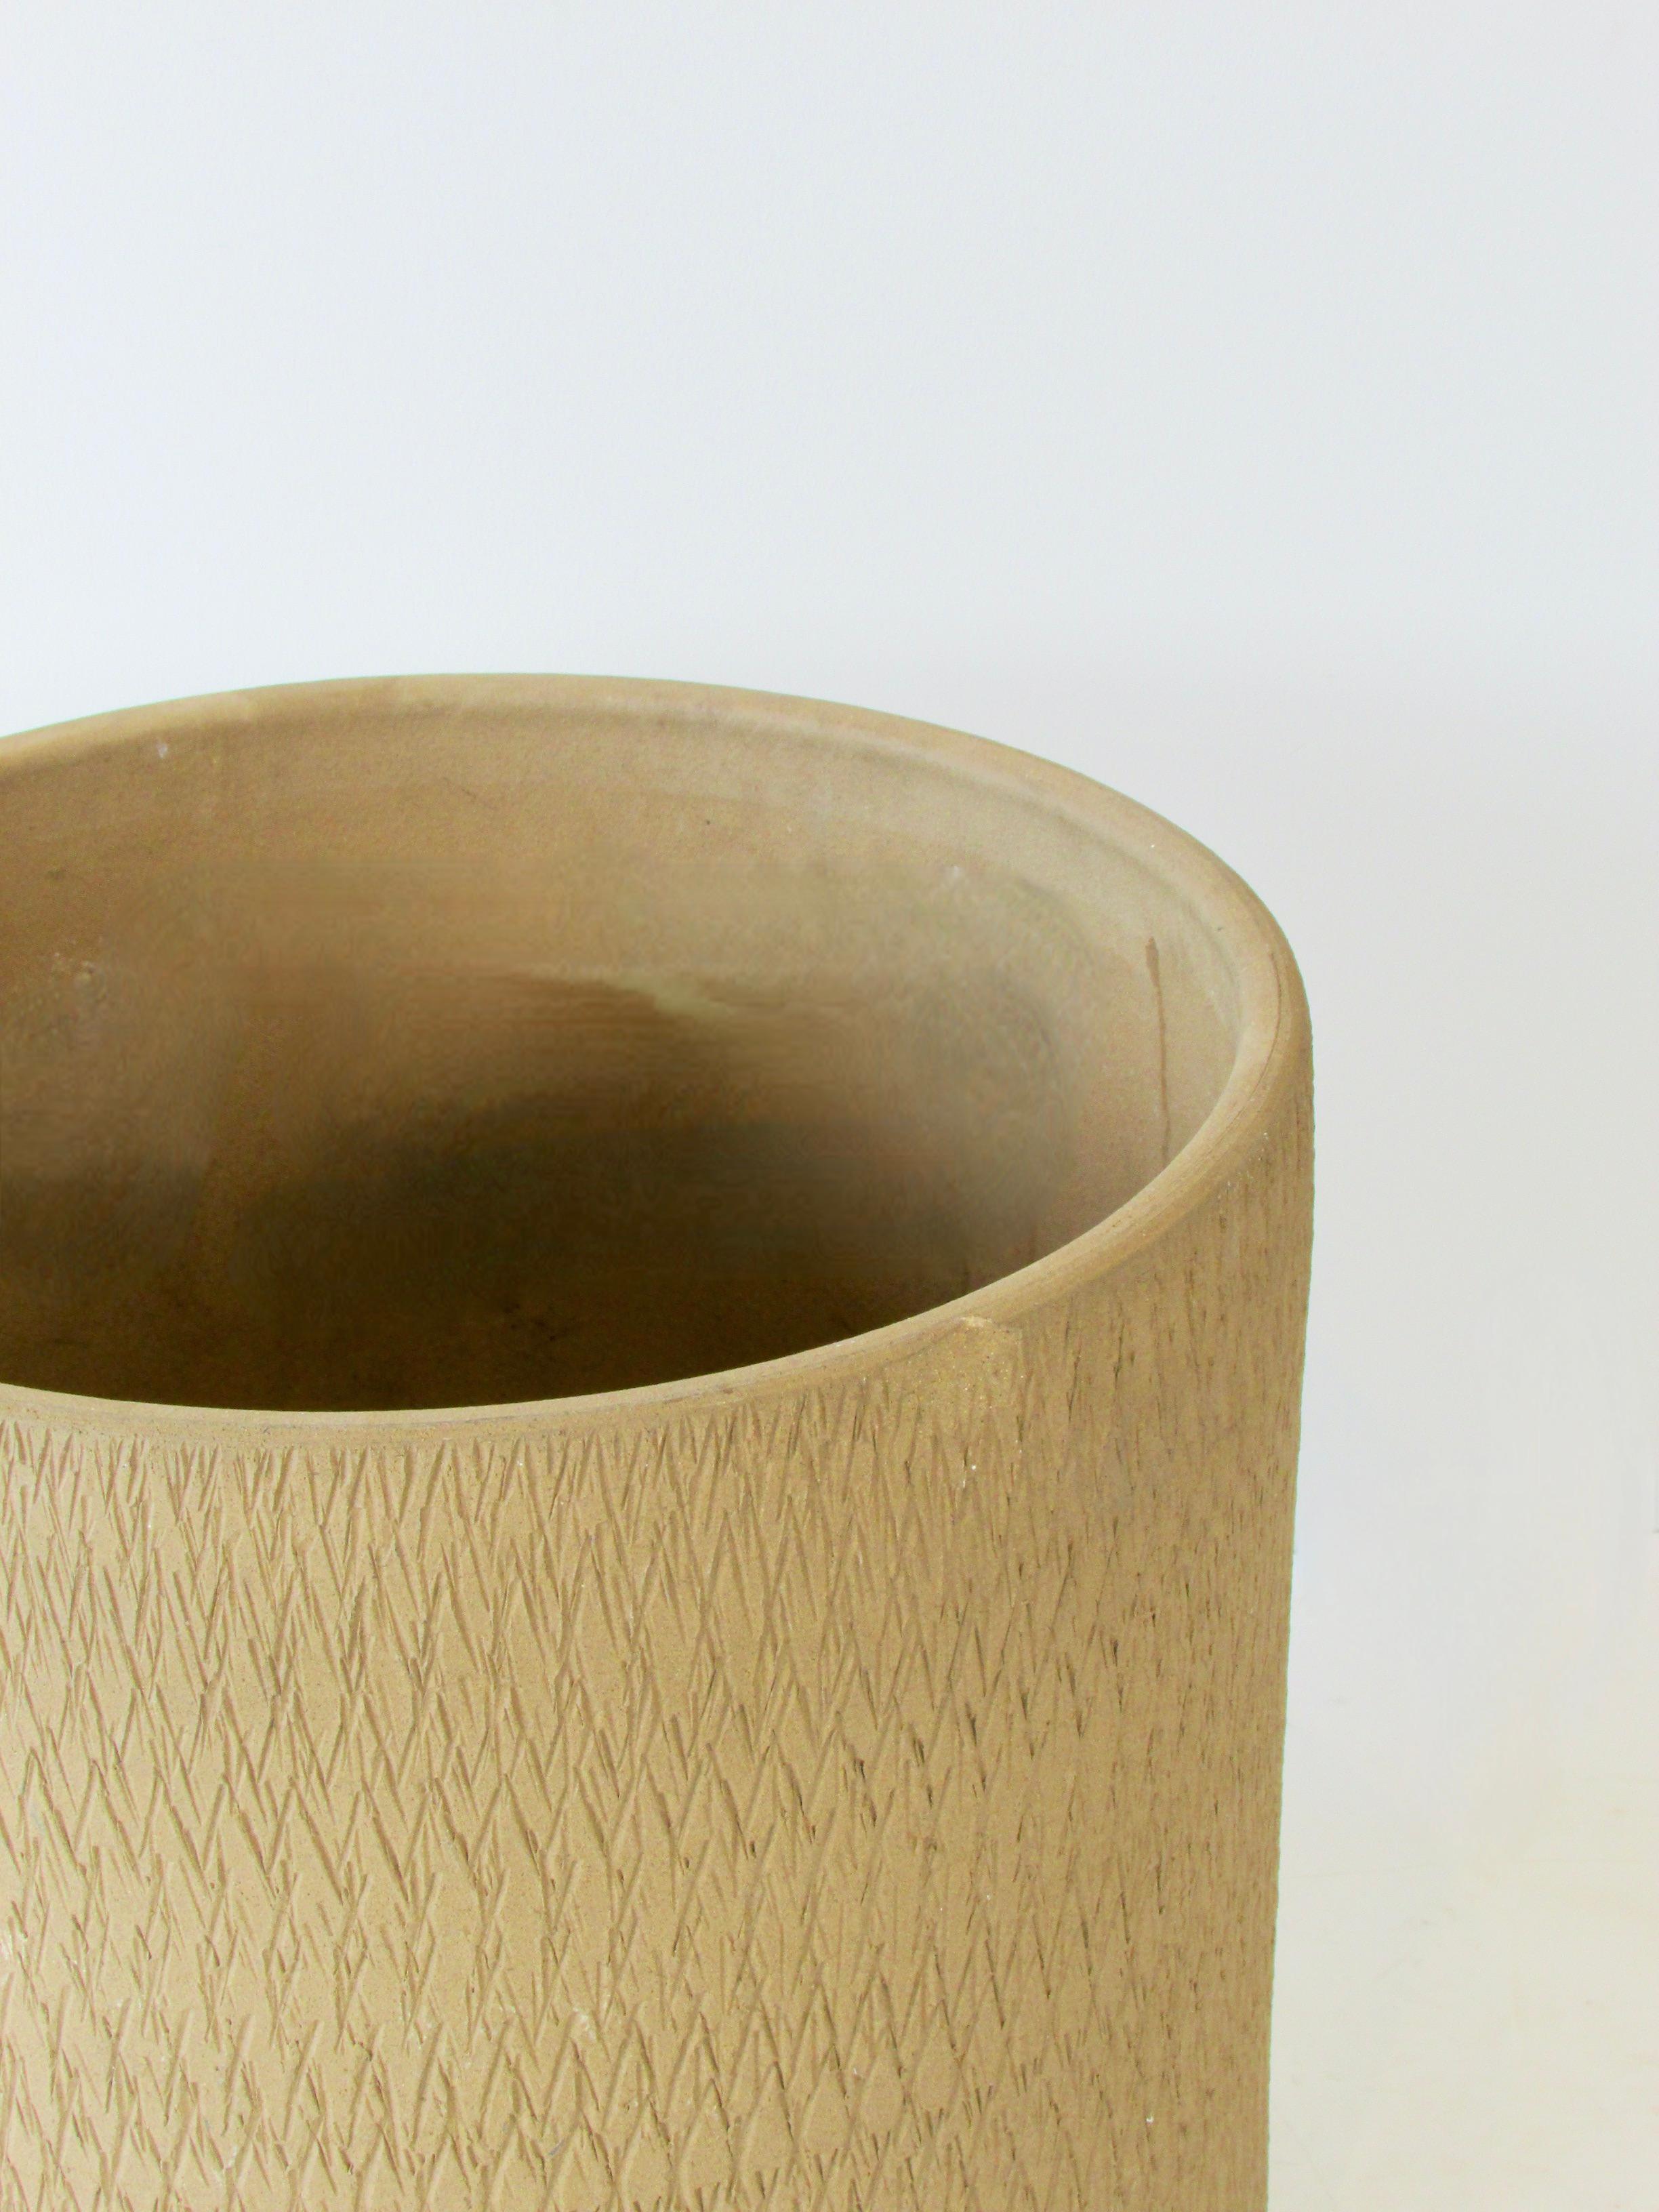 Fired Large Earth Tone Gainey Planter Pot with Organic Sgrafitto Design